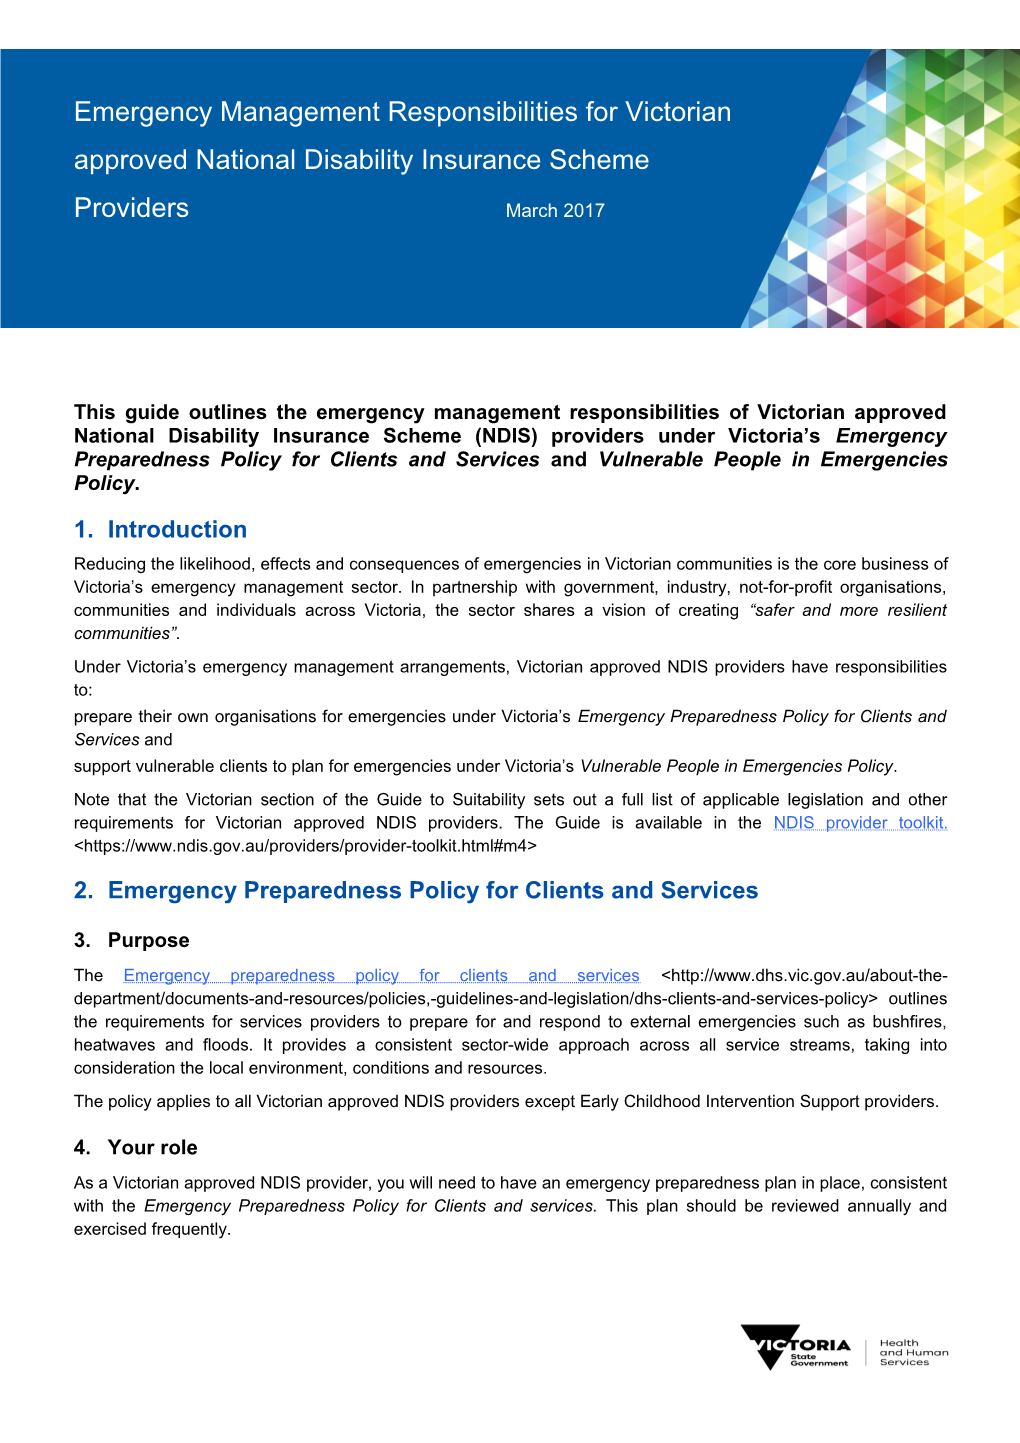 Emergency Management Responsibilities for Victorian Approved National Disability Insurance